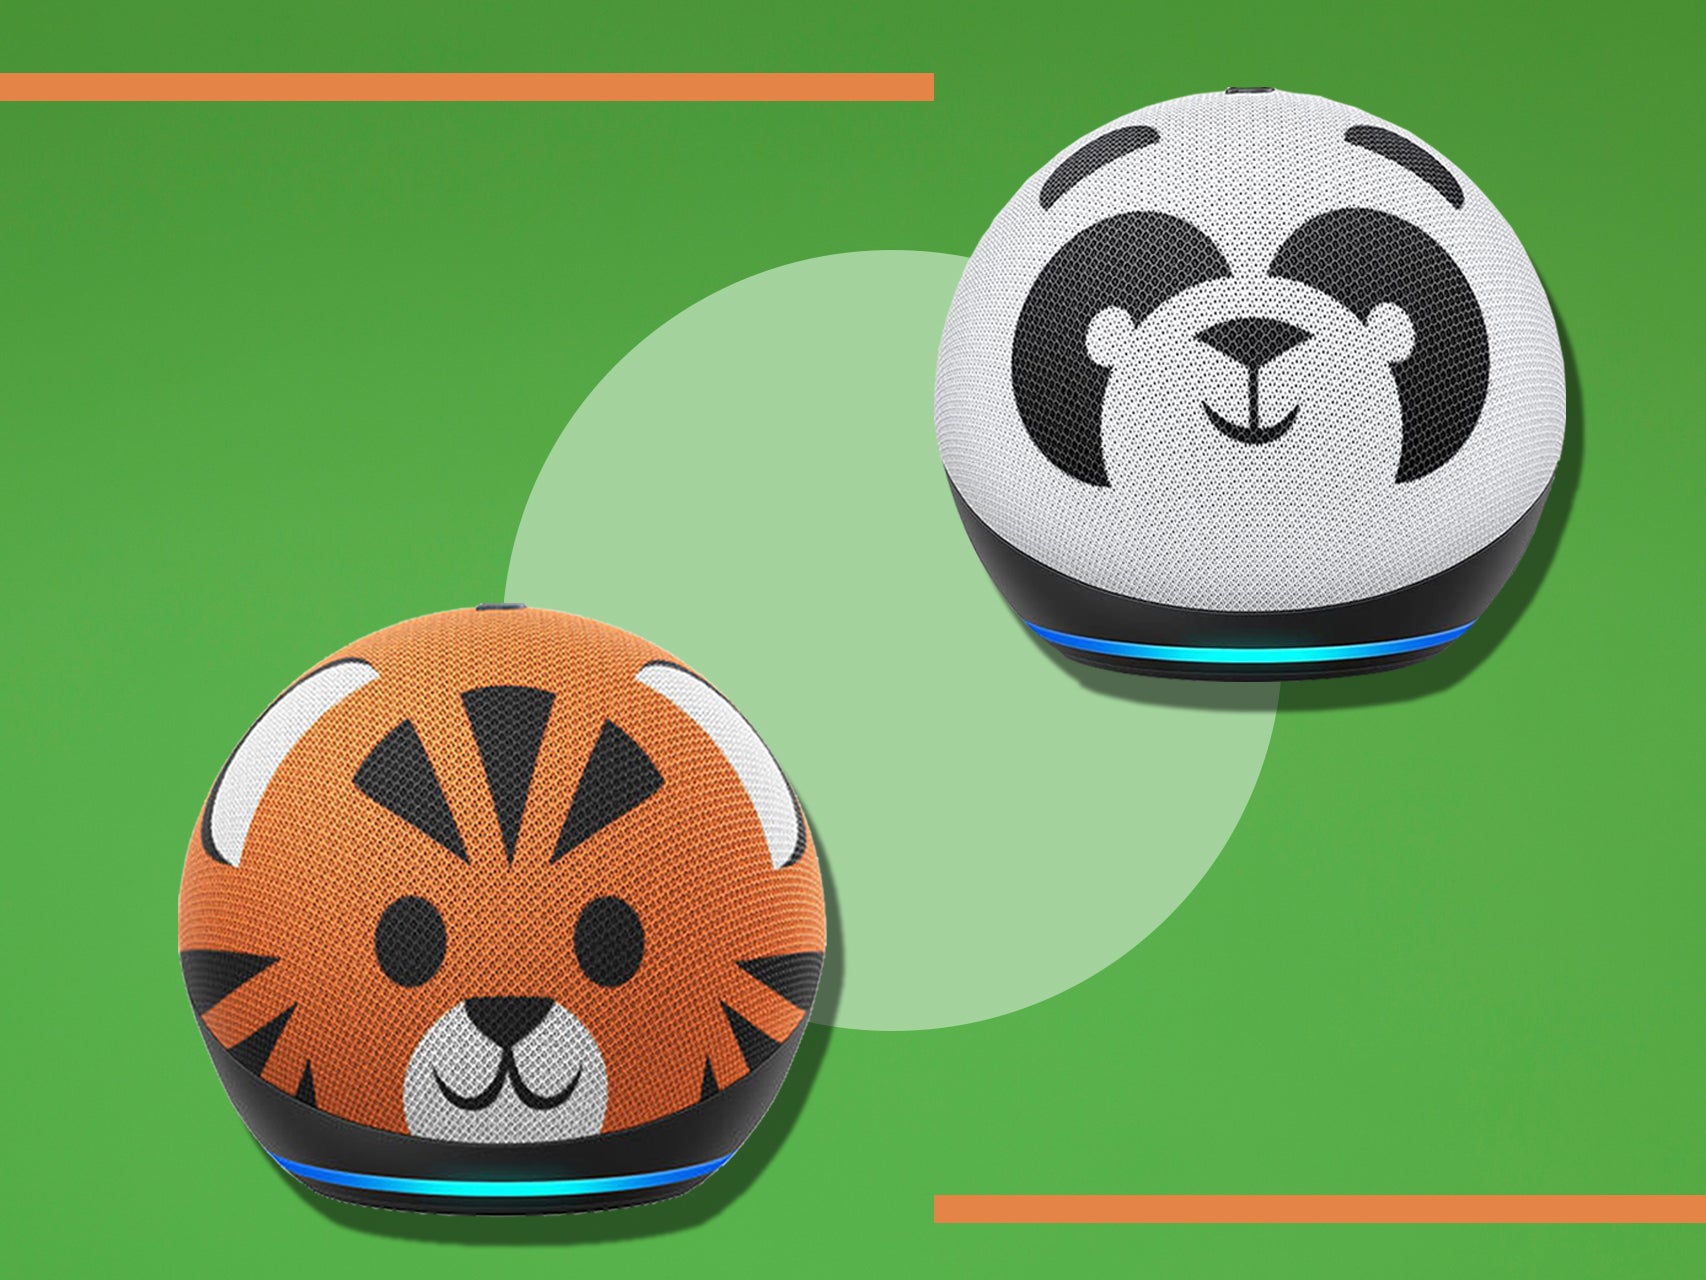 The super cute designs include an adorable little tiger or panda head